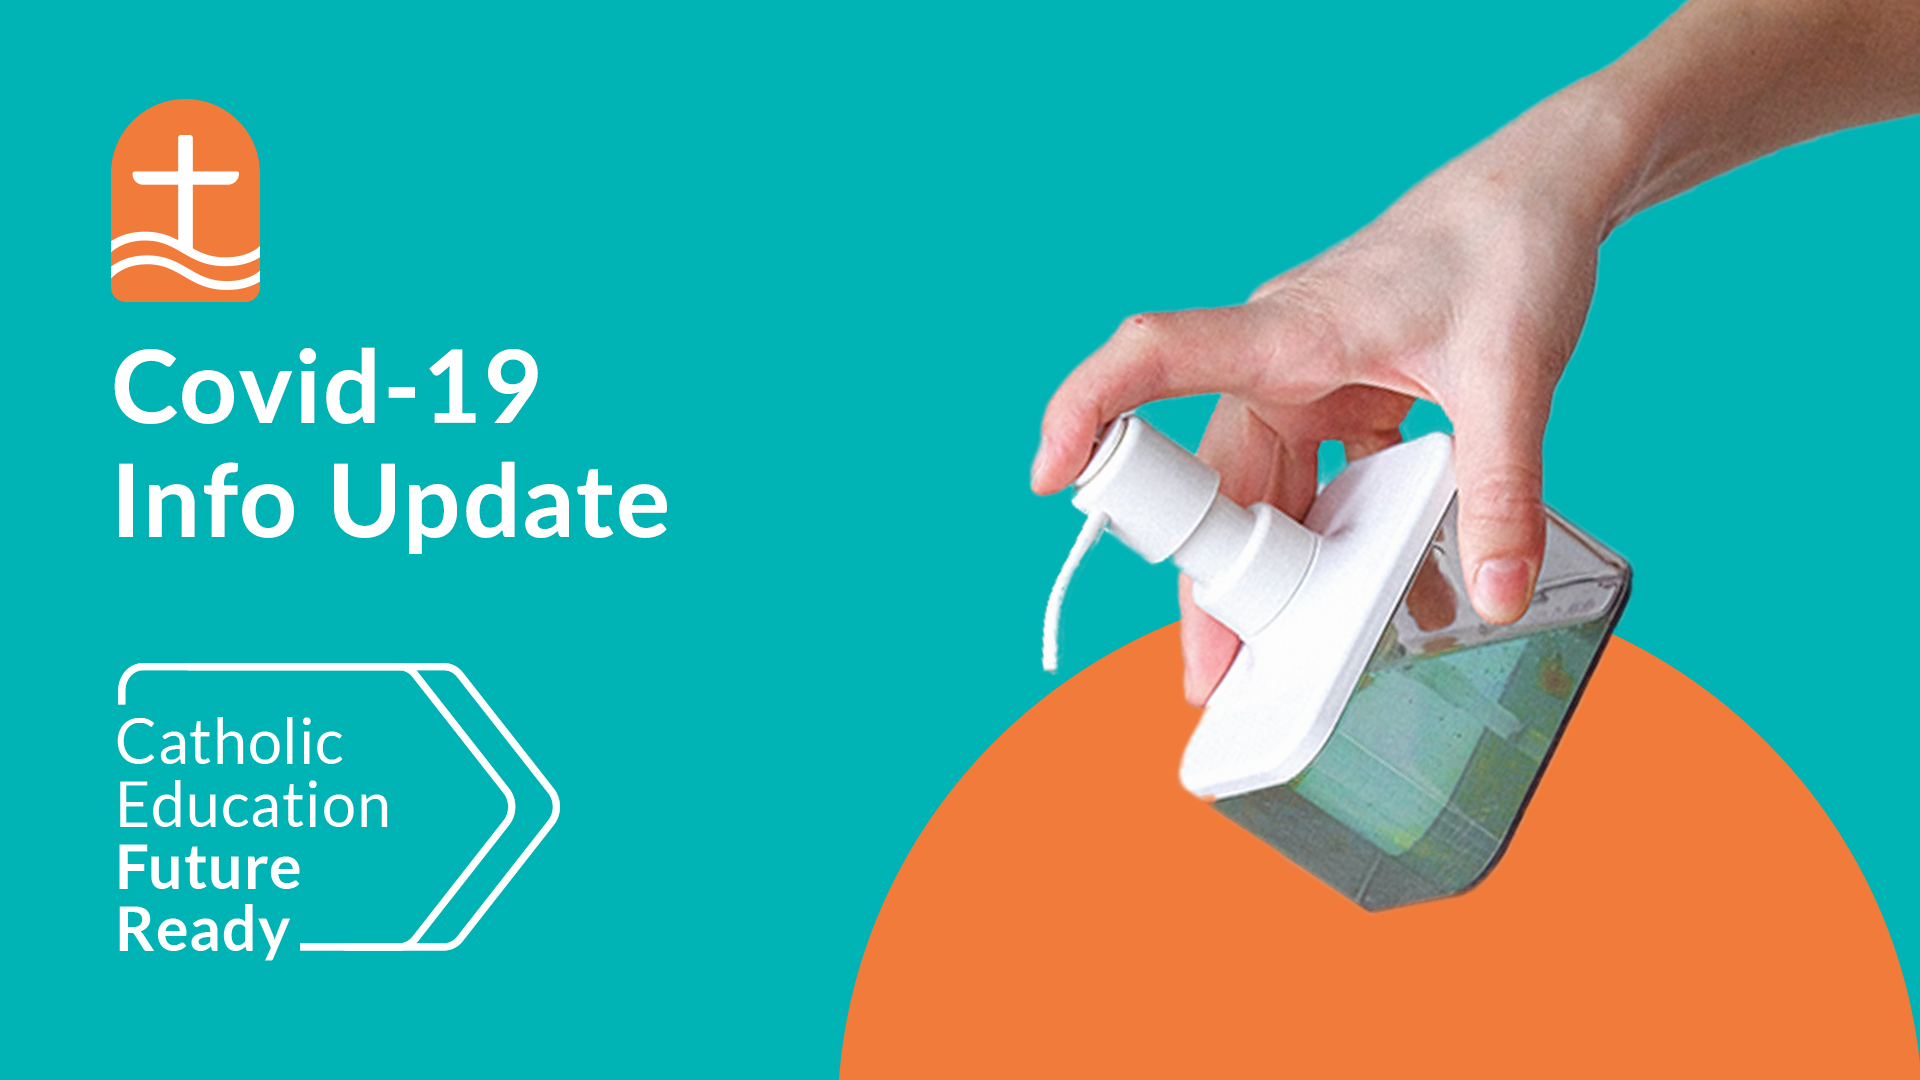 COVID-19 Update – Changes in Public Health Guidance